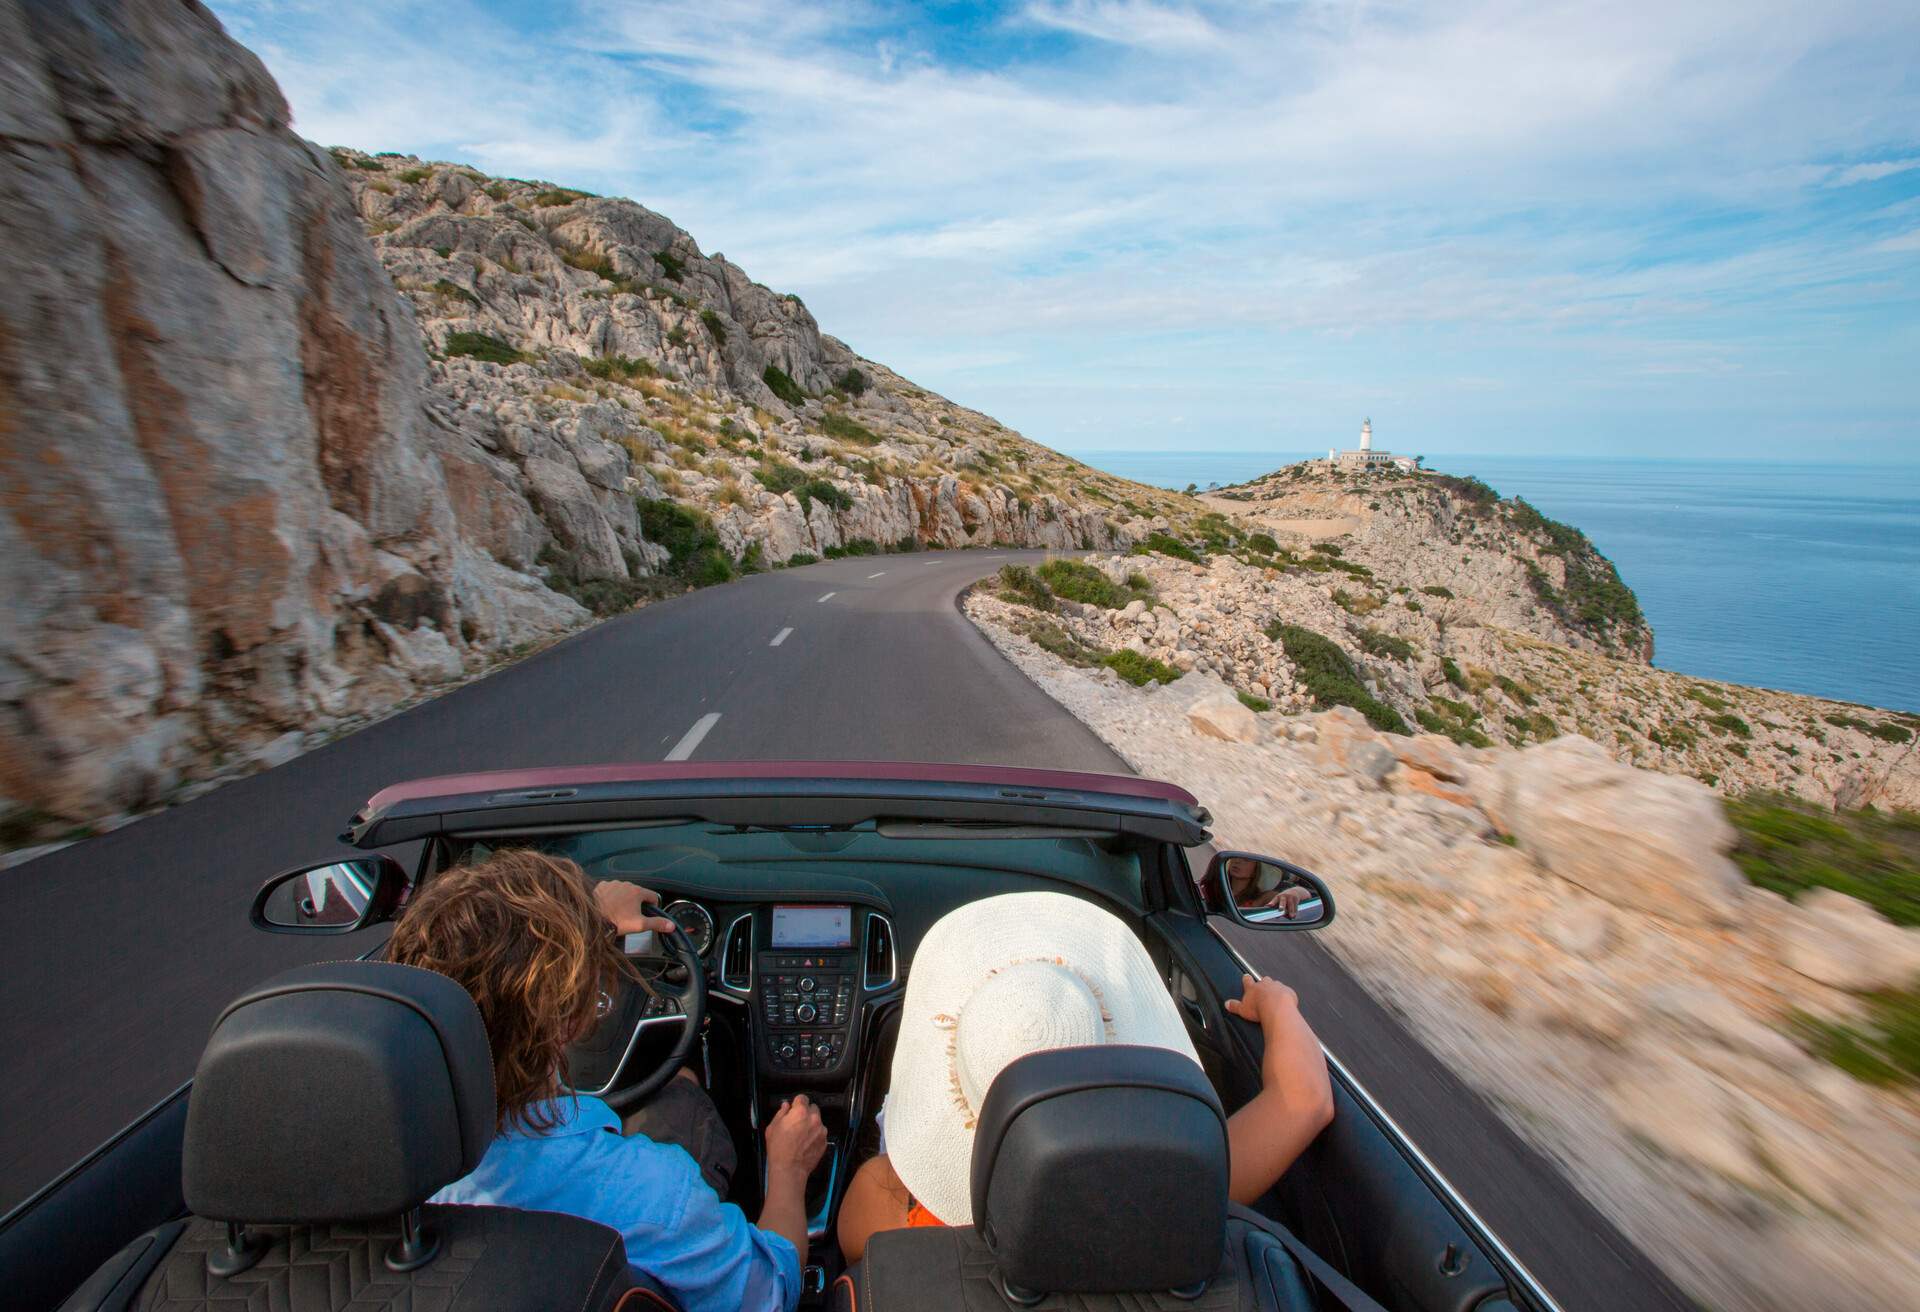 Two people in a car, driving on a road in Spain